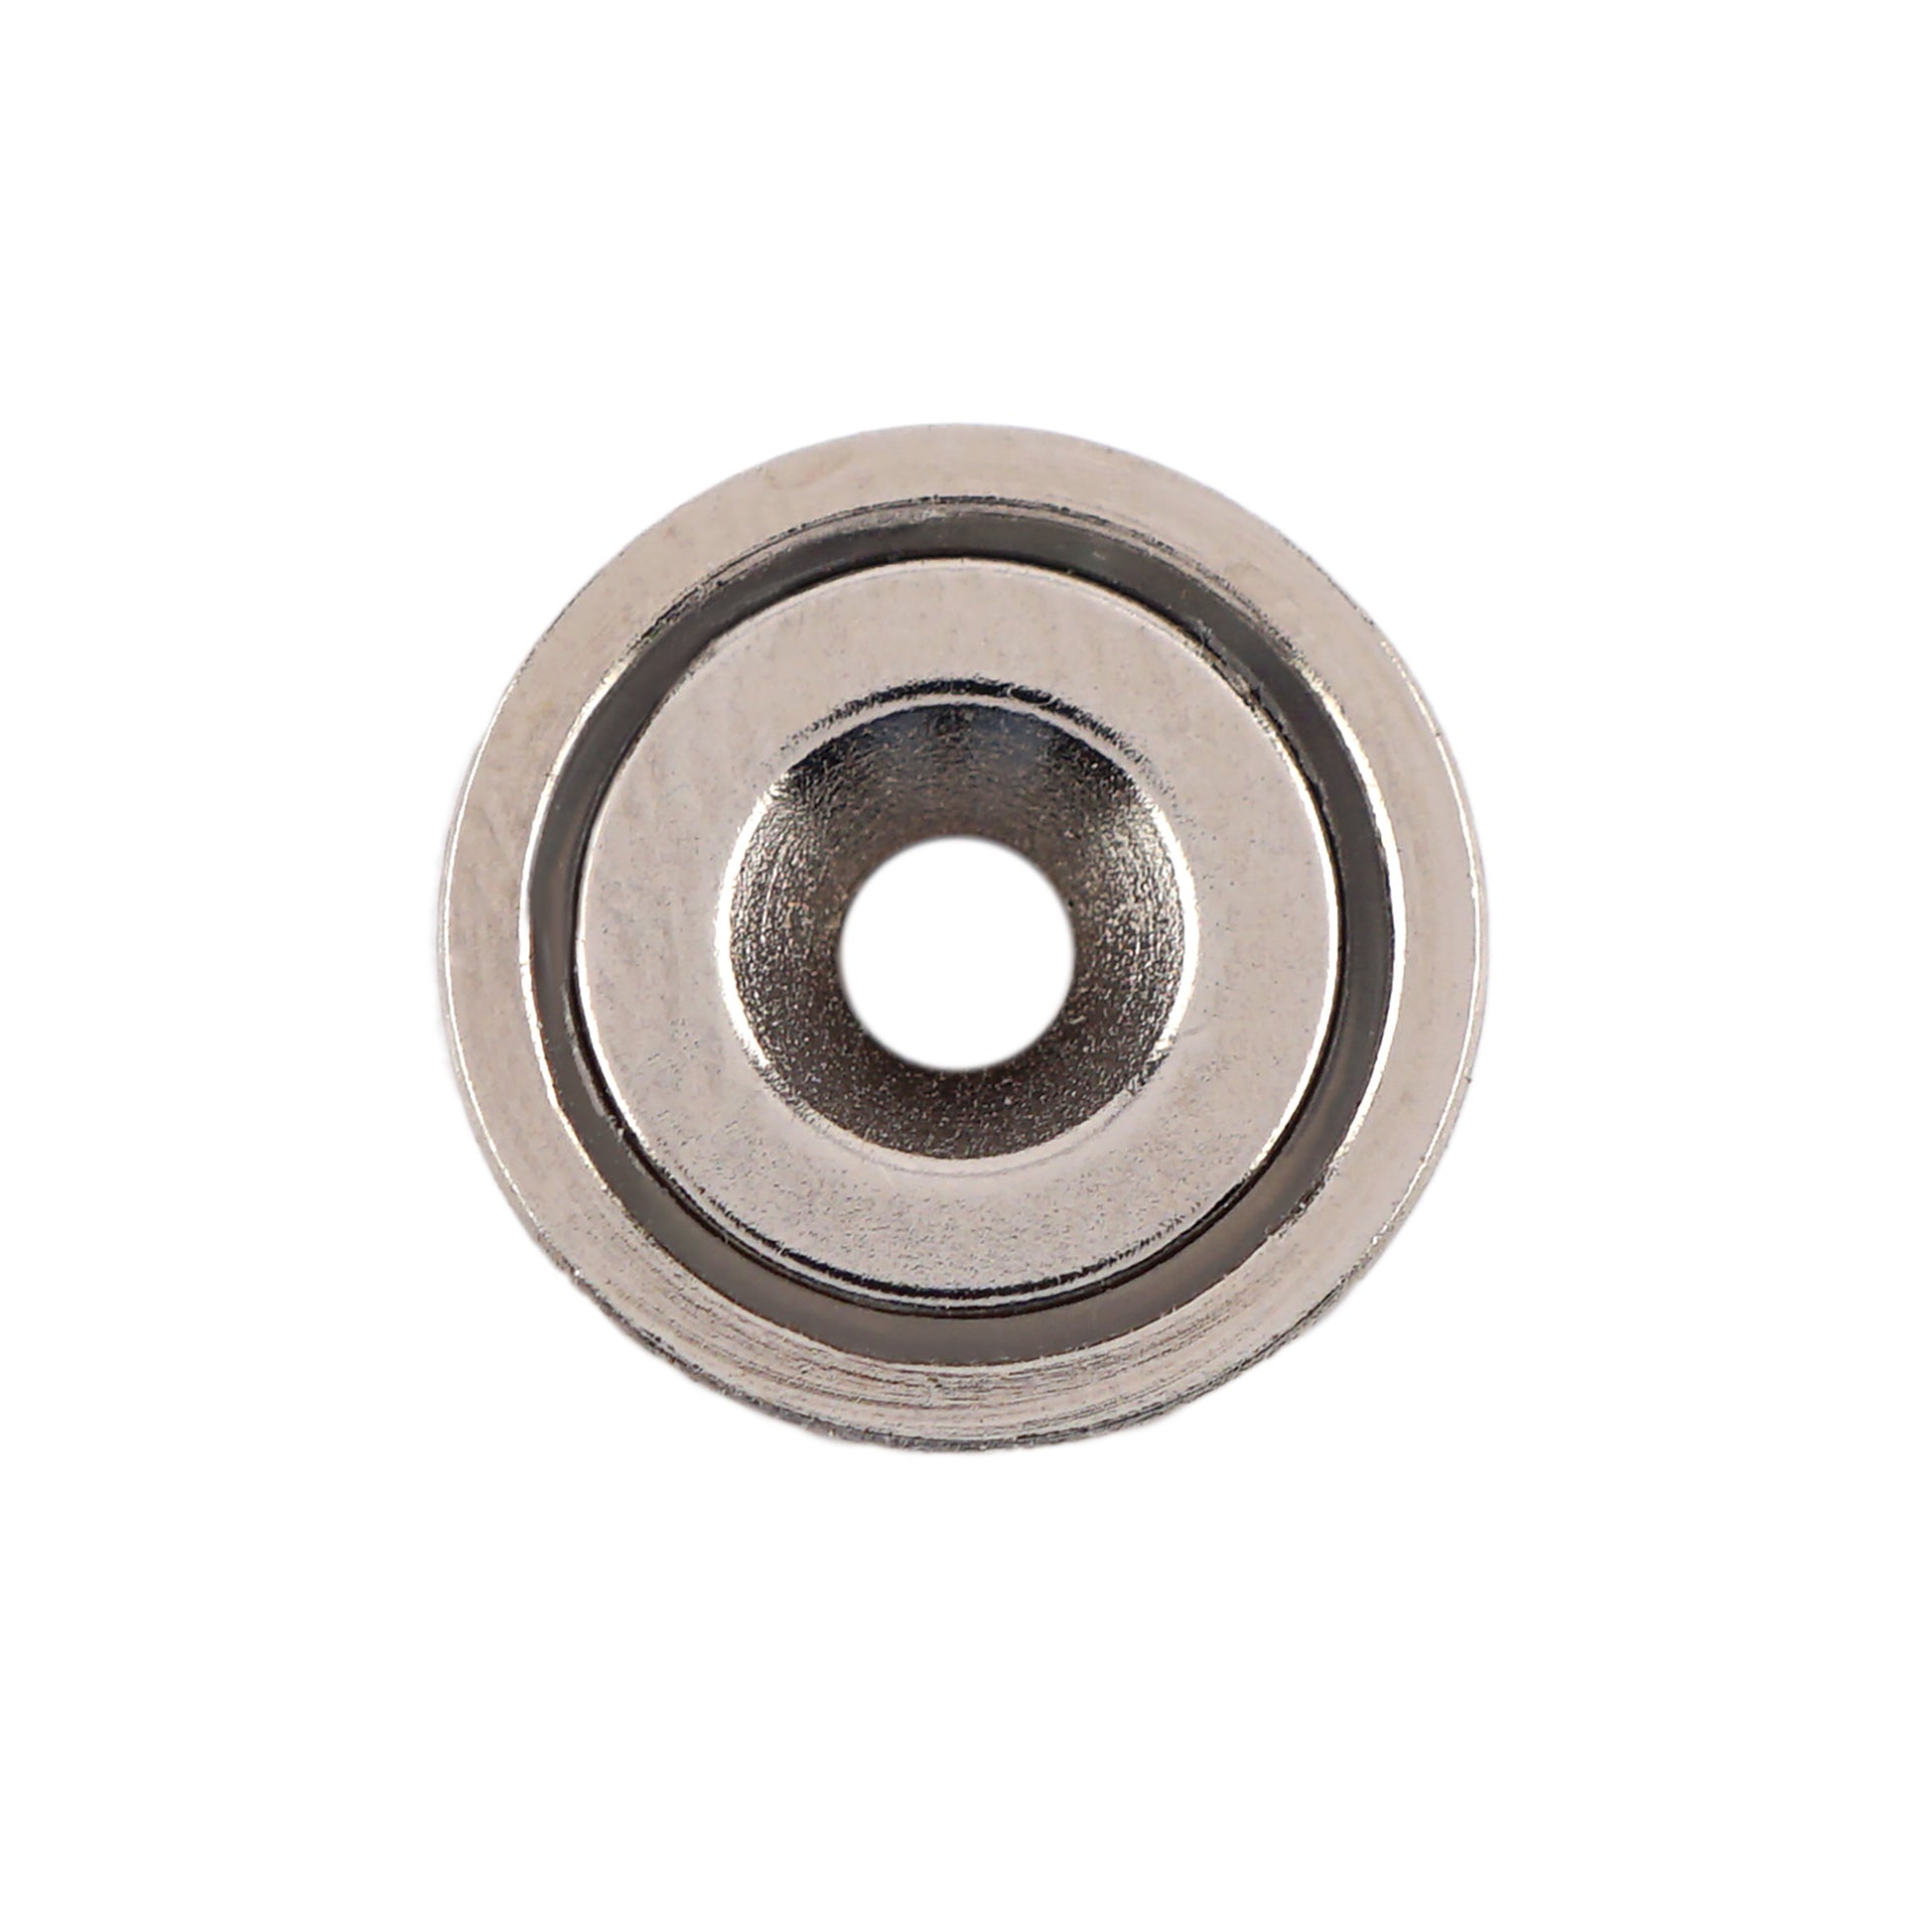 Load image into Gallery viewer, NAC006200NBX Neodymium Countersunk Round Base Assembly - Top View